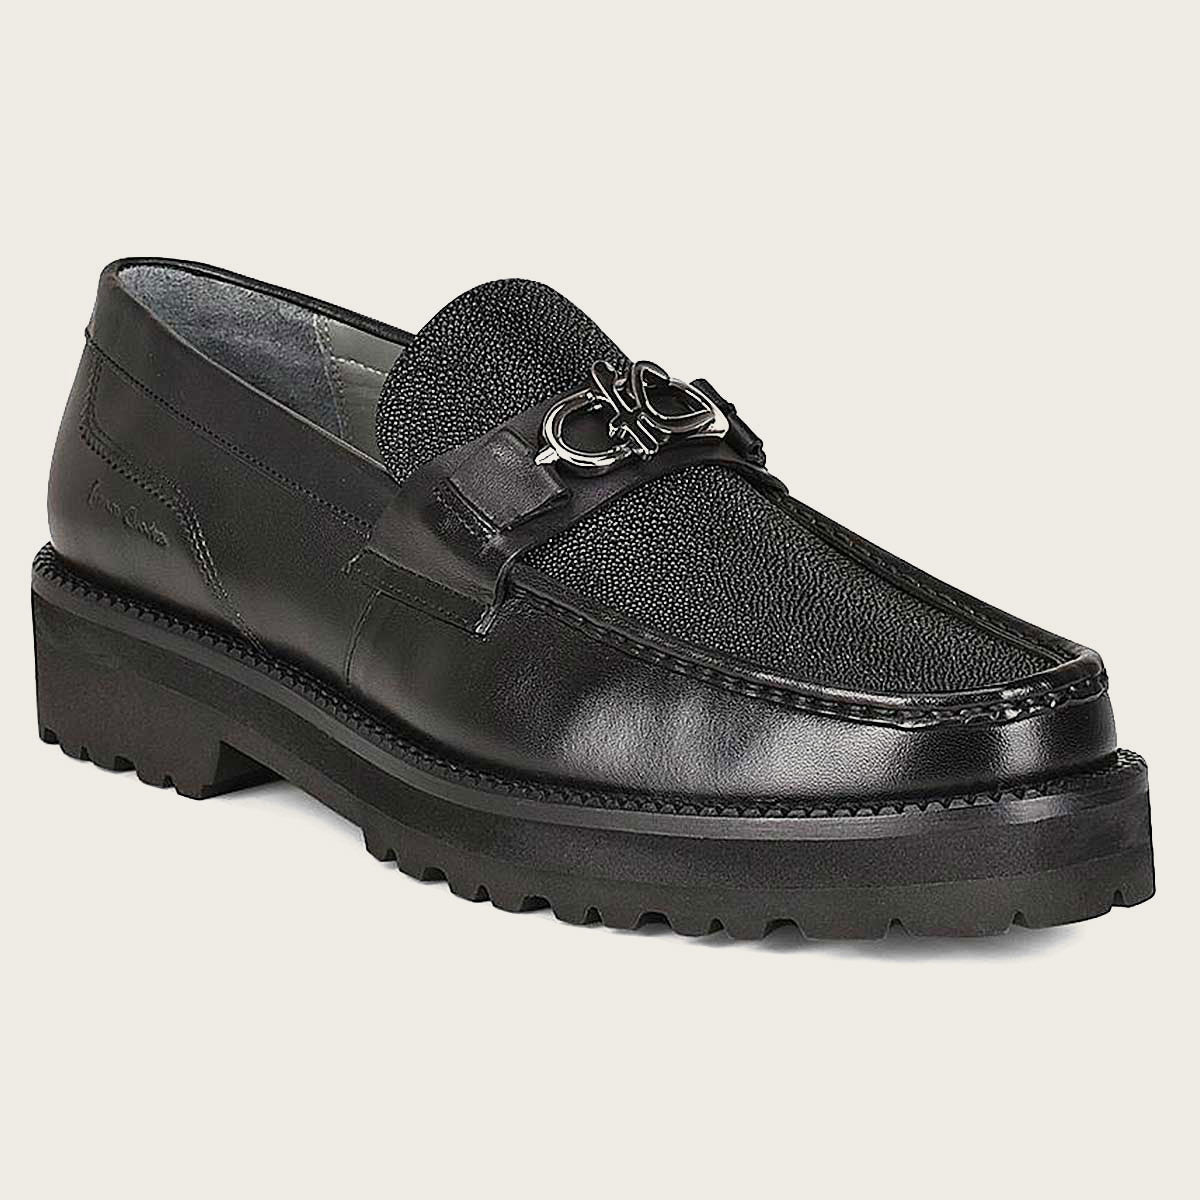 Black leather men loafers, stingray leather and bovine leather